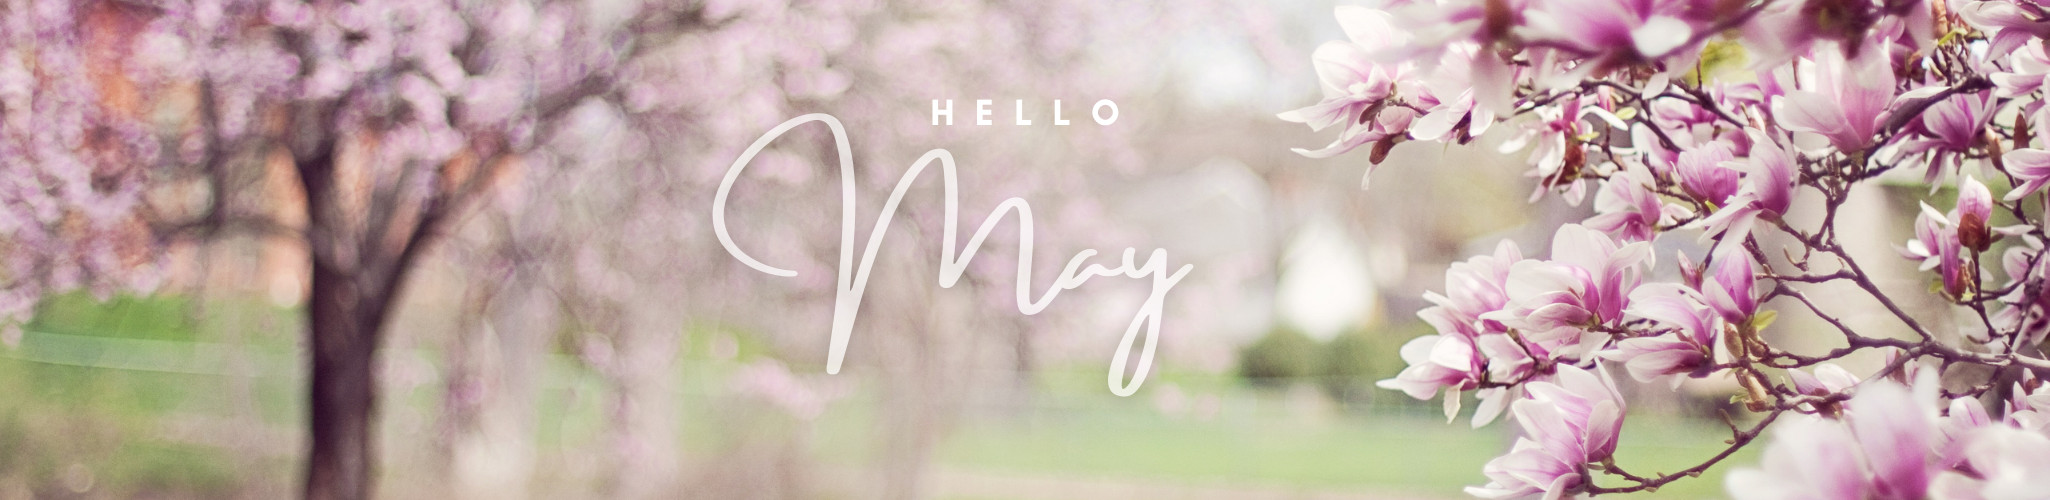 "Hello May" with cherry blossom trees in background